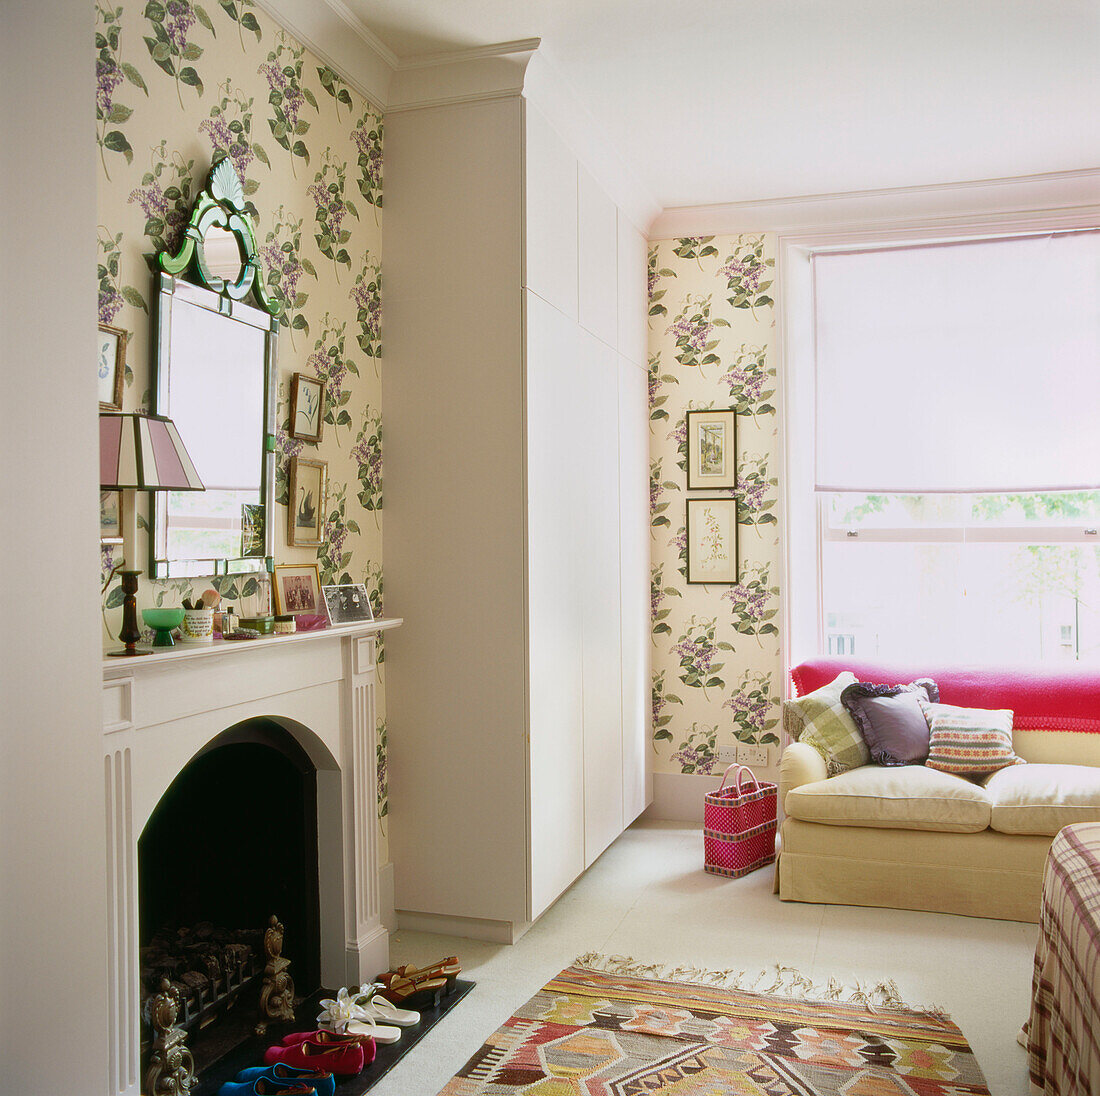 Fireplace in bedroom with Venetian mirror pretty floral patterned wallpaper and built in wardrobe